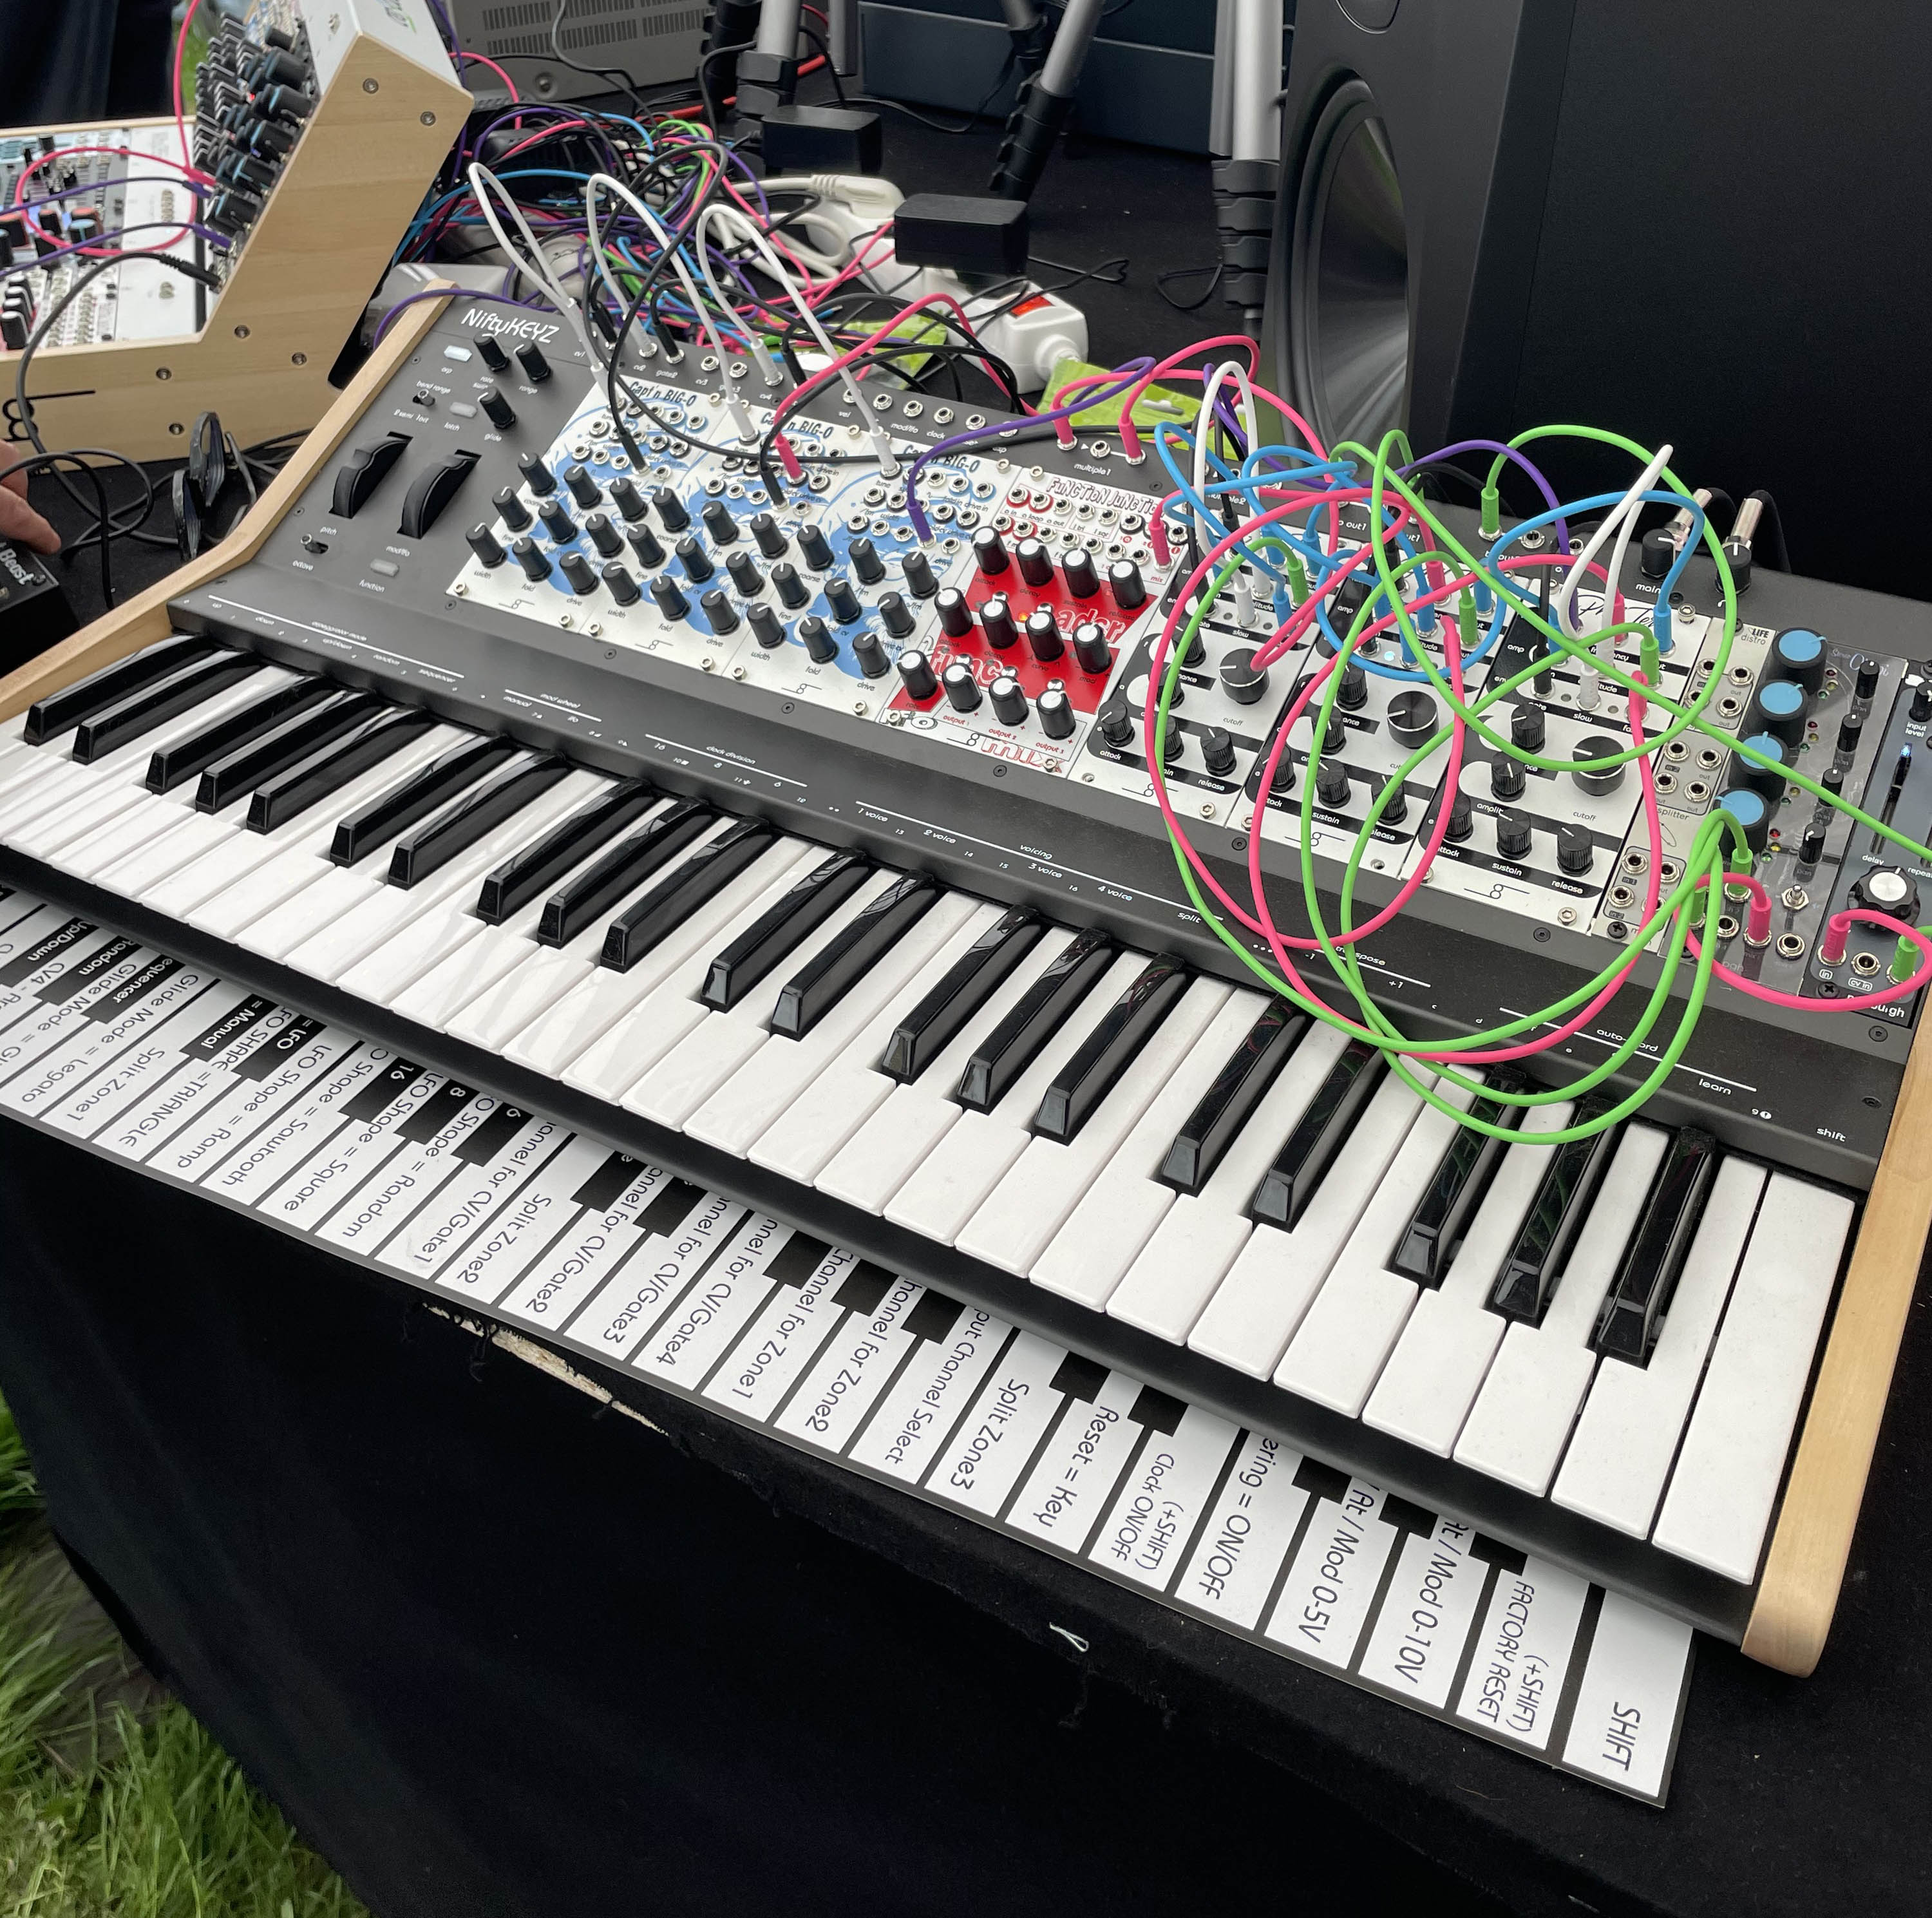 Cre8audio’s NiftyKEYZ stays true to its name by providing a nifty solution to those on a budget looking for a decent Eurorack case that doubles as a keyboard.